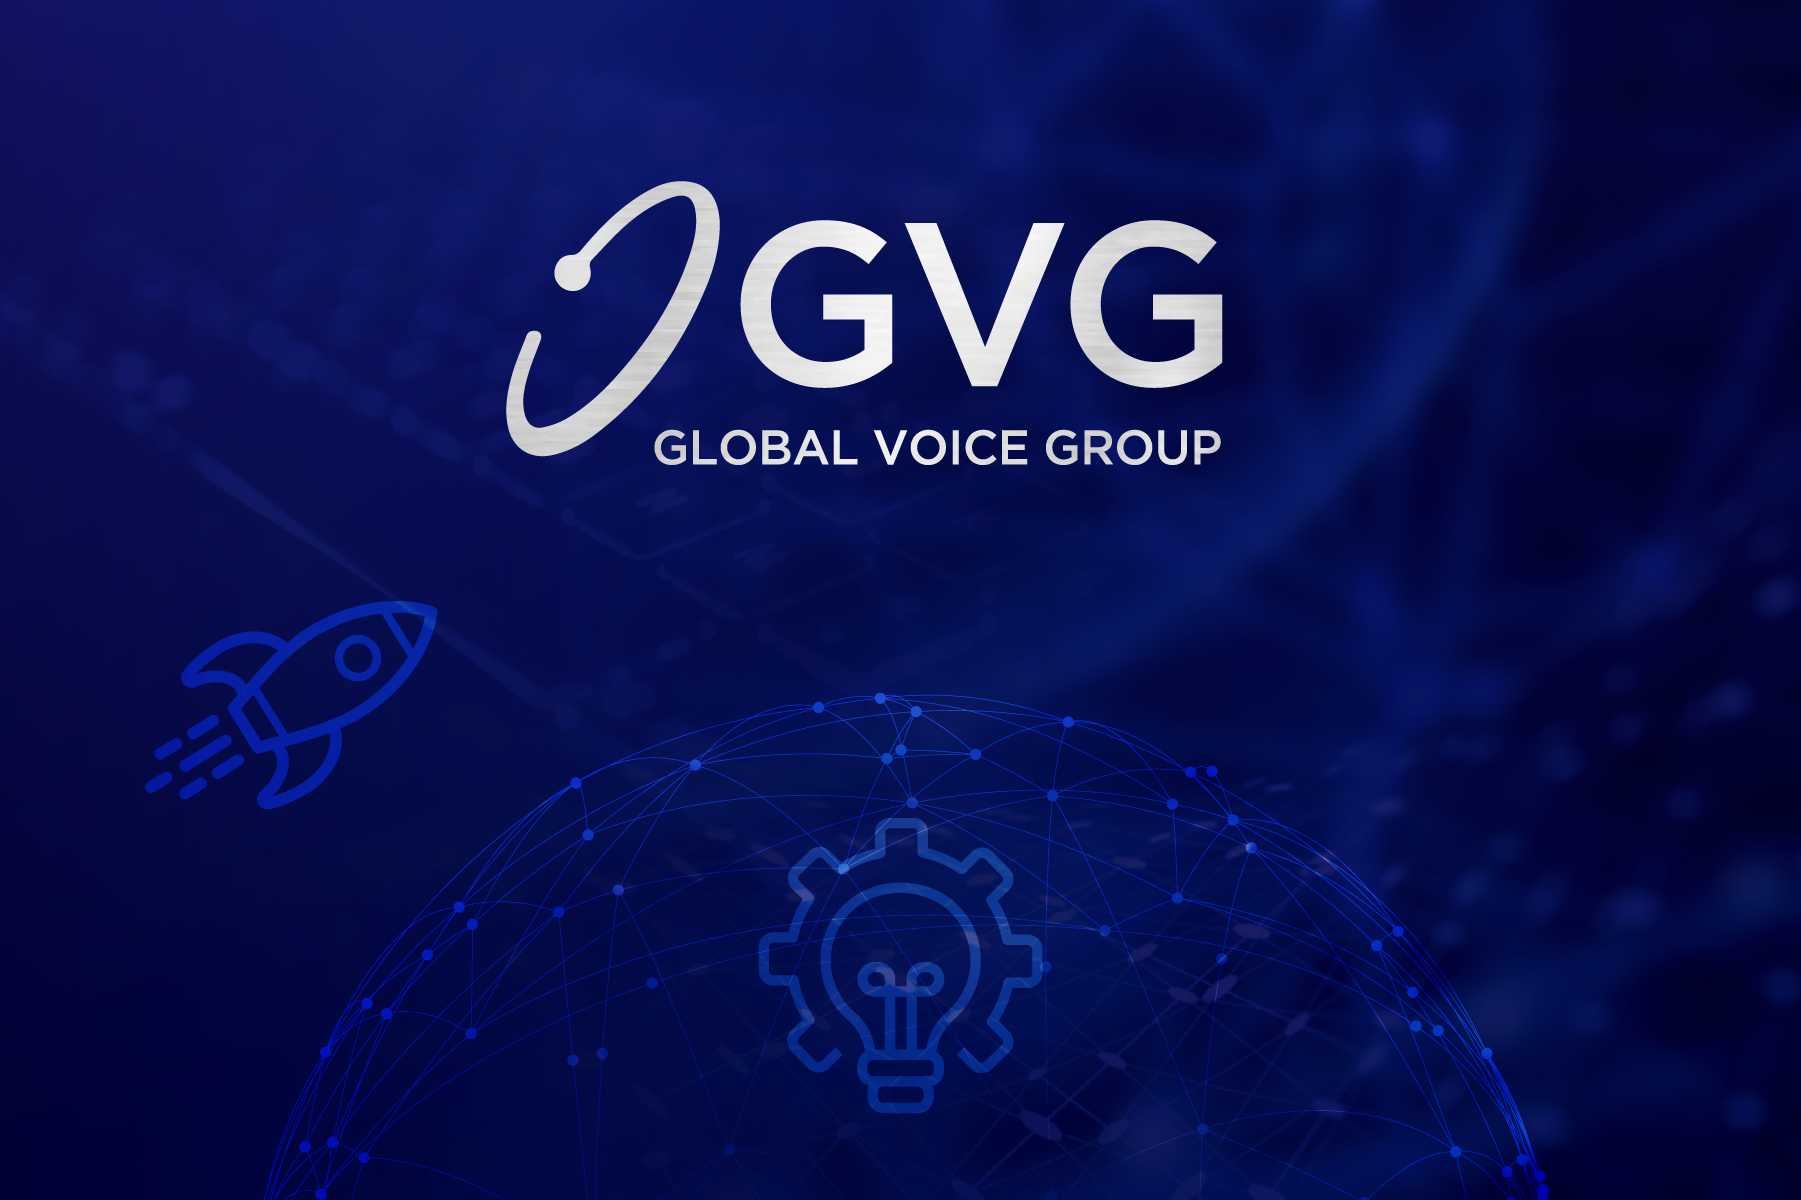 GVG seeking African reg-tech solutions for up to $300k funding support scaling their businesses